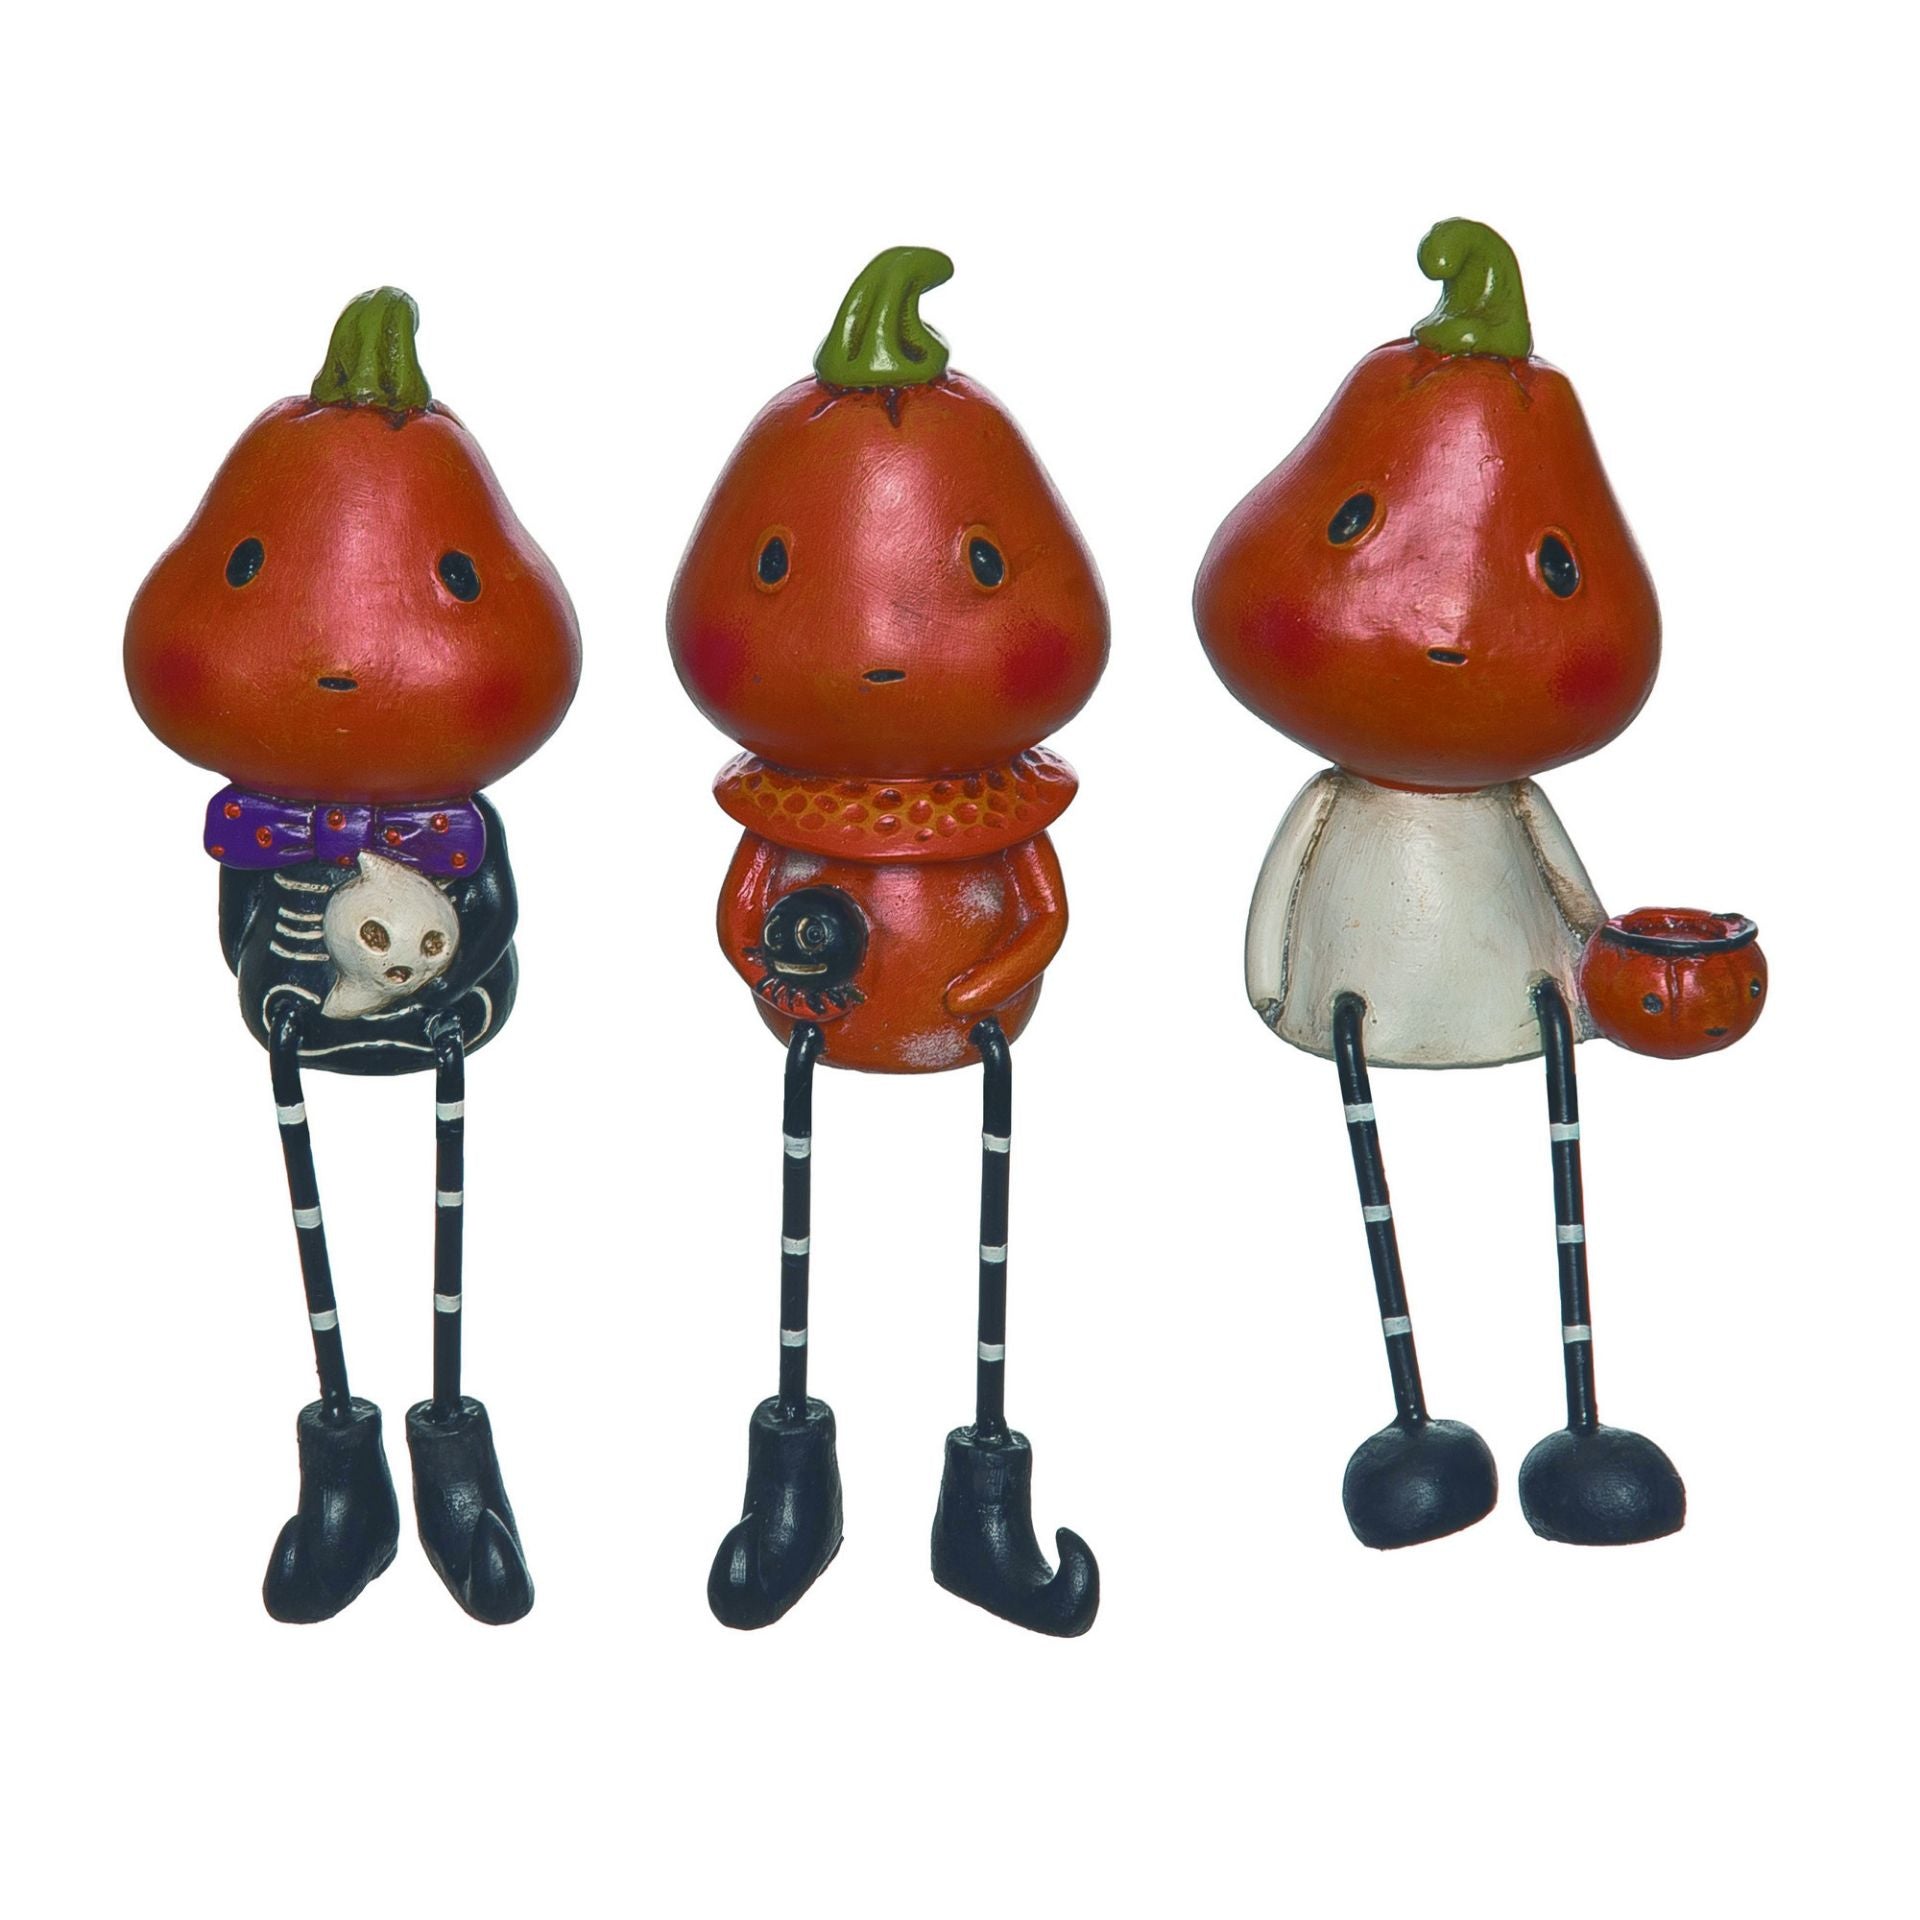 Blushing Ghost Figurines - Pick One!